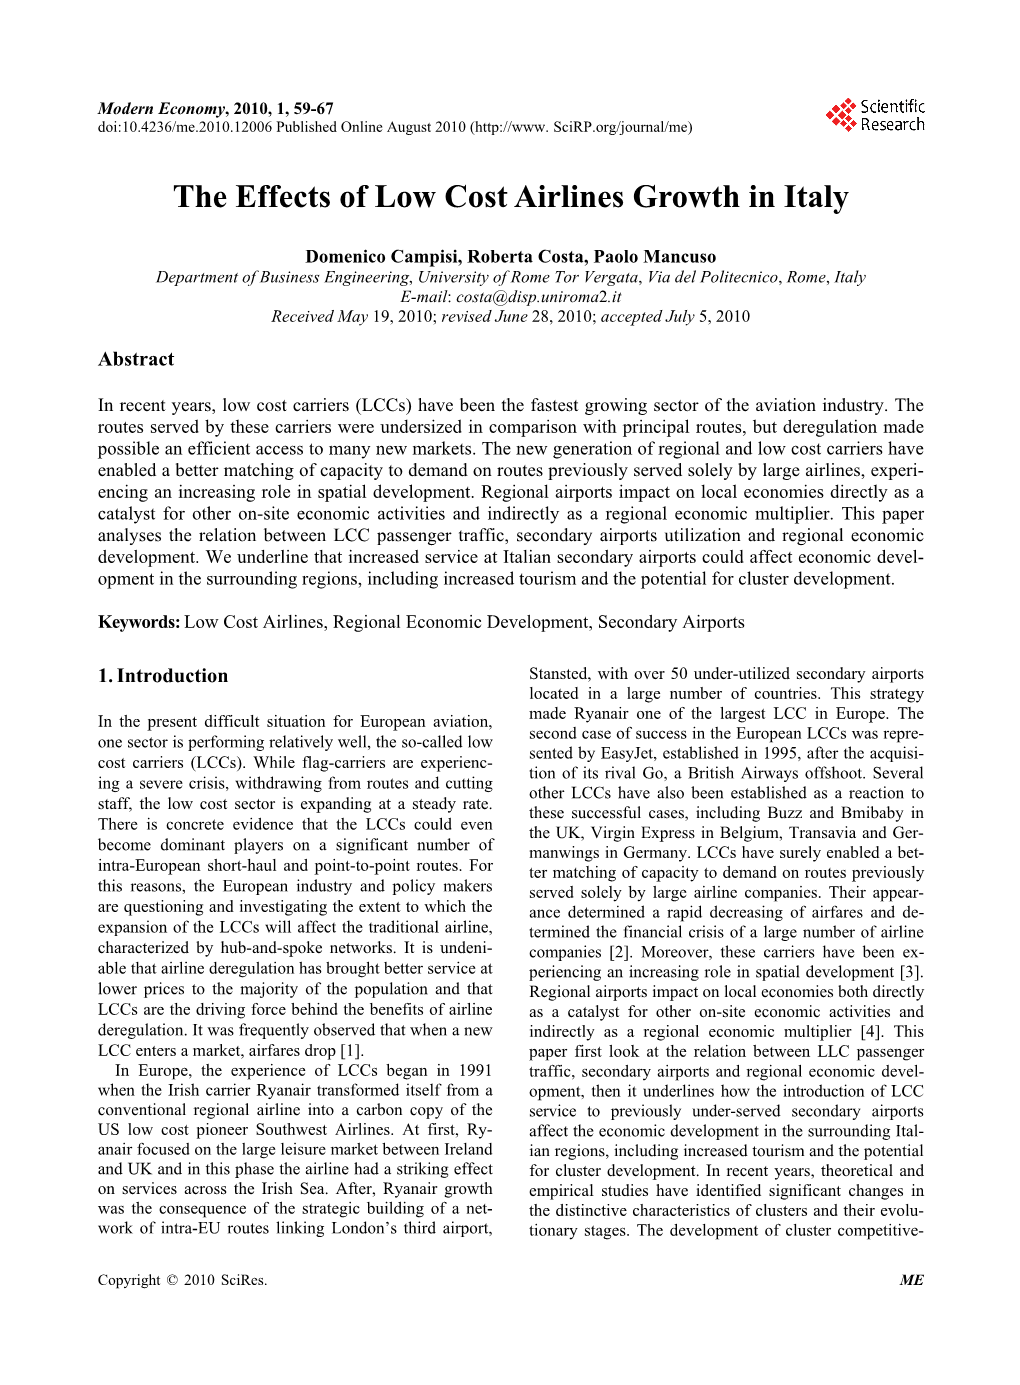 The Effects of Low Cost Airlines Growth in Italy